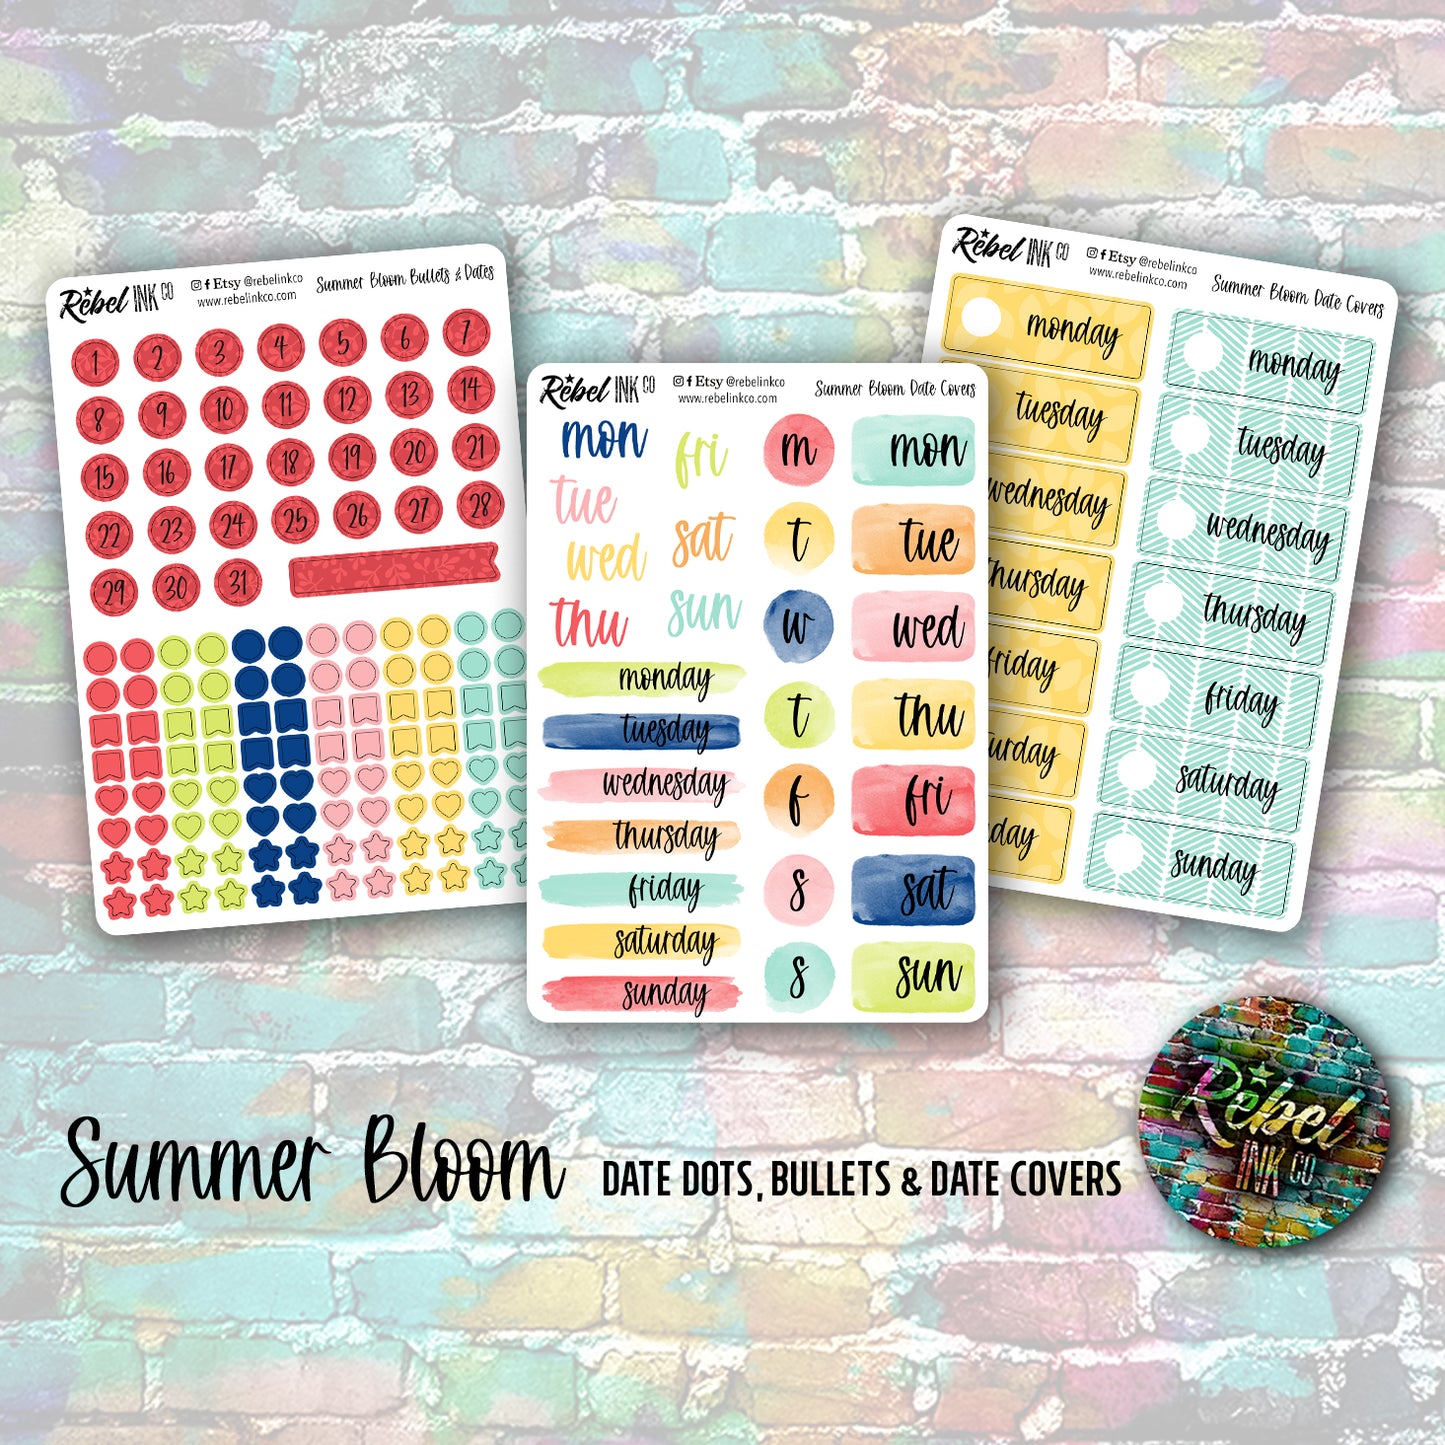 Summer Bloom - Date Dots & Bullets and Date Covers